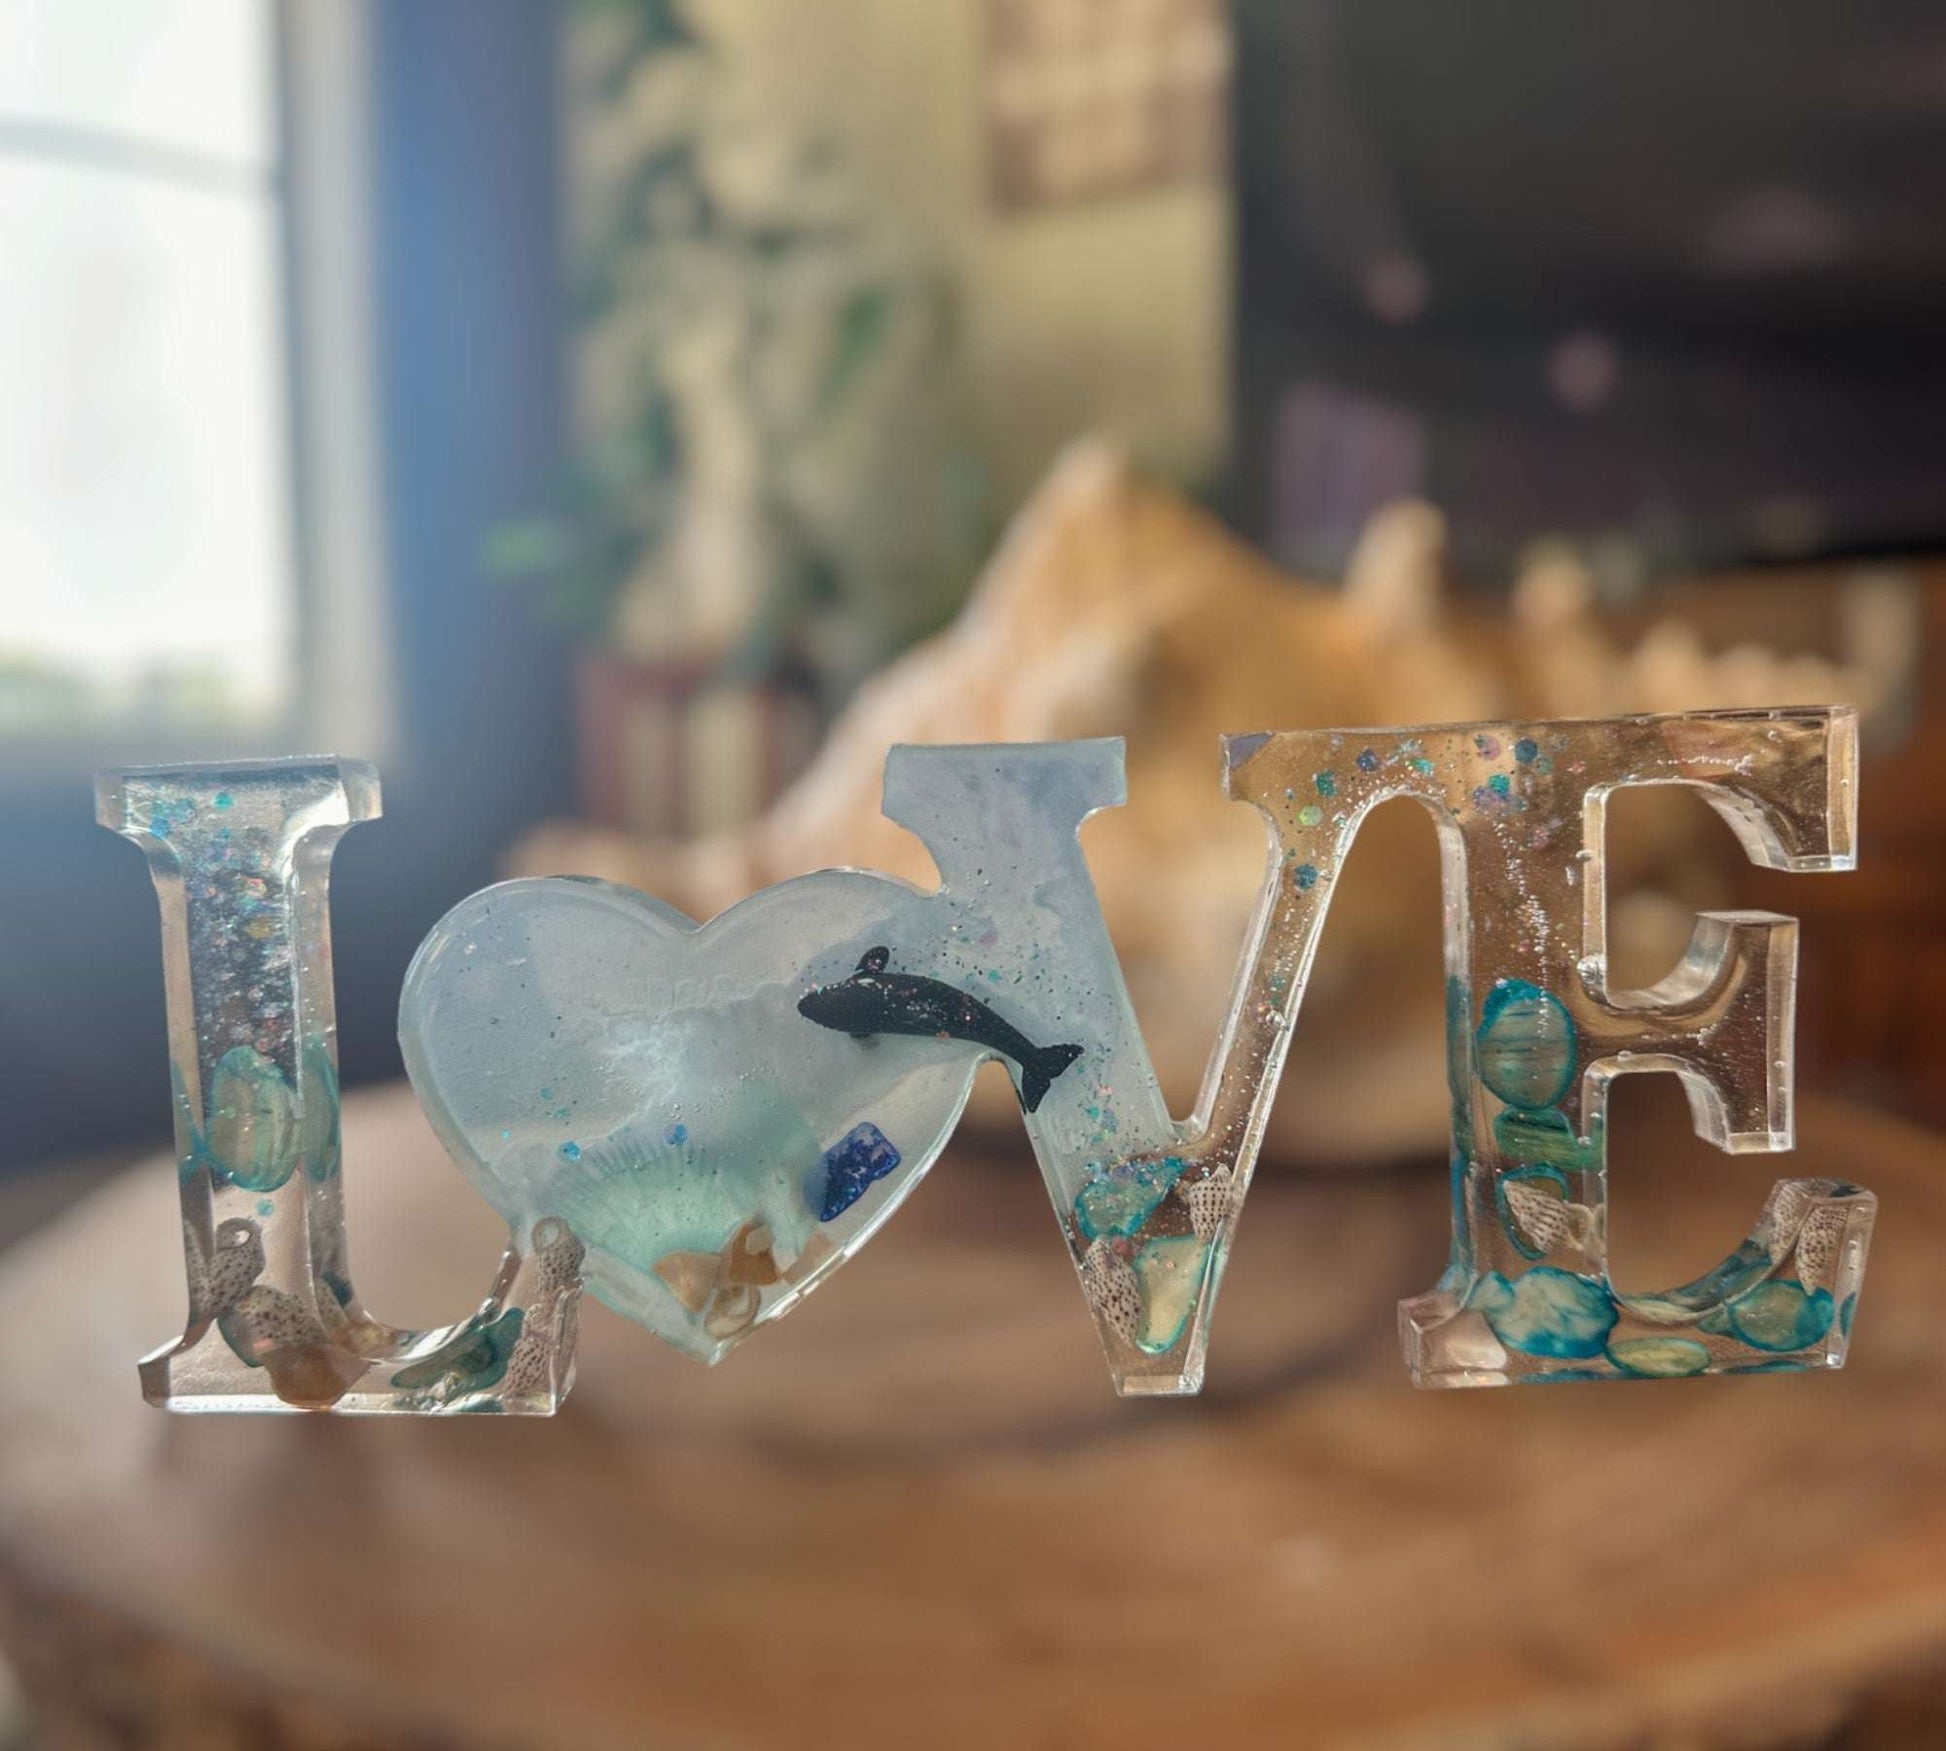 Oceans Embrace - Handcrafted LOVE Word Decor with Real Seashells